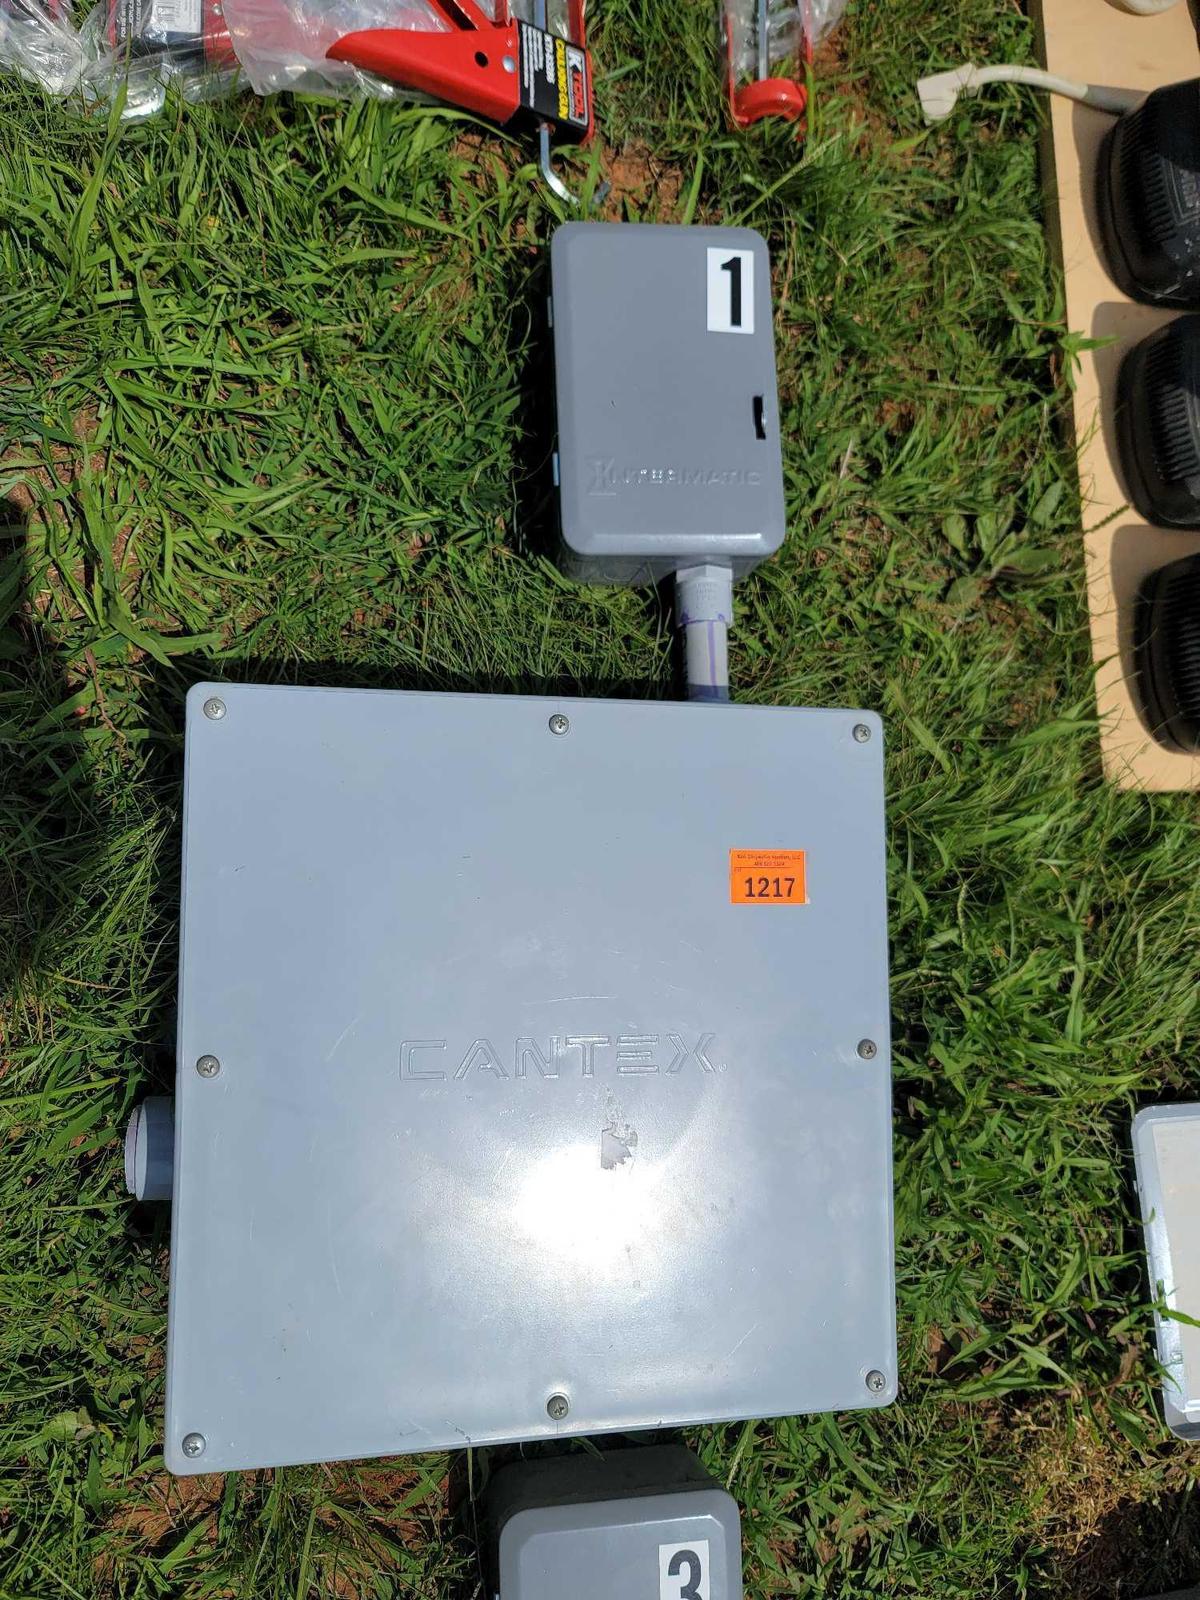 12x12 junction box with digital DT101 reader